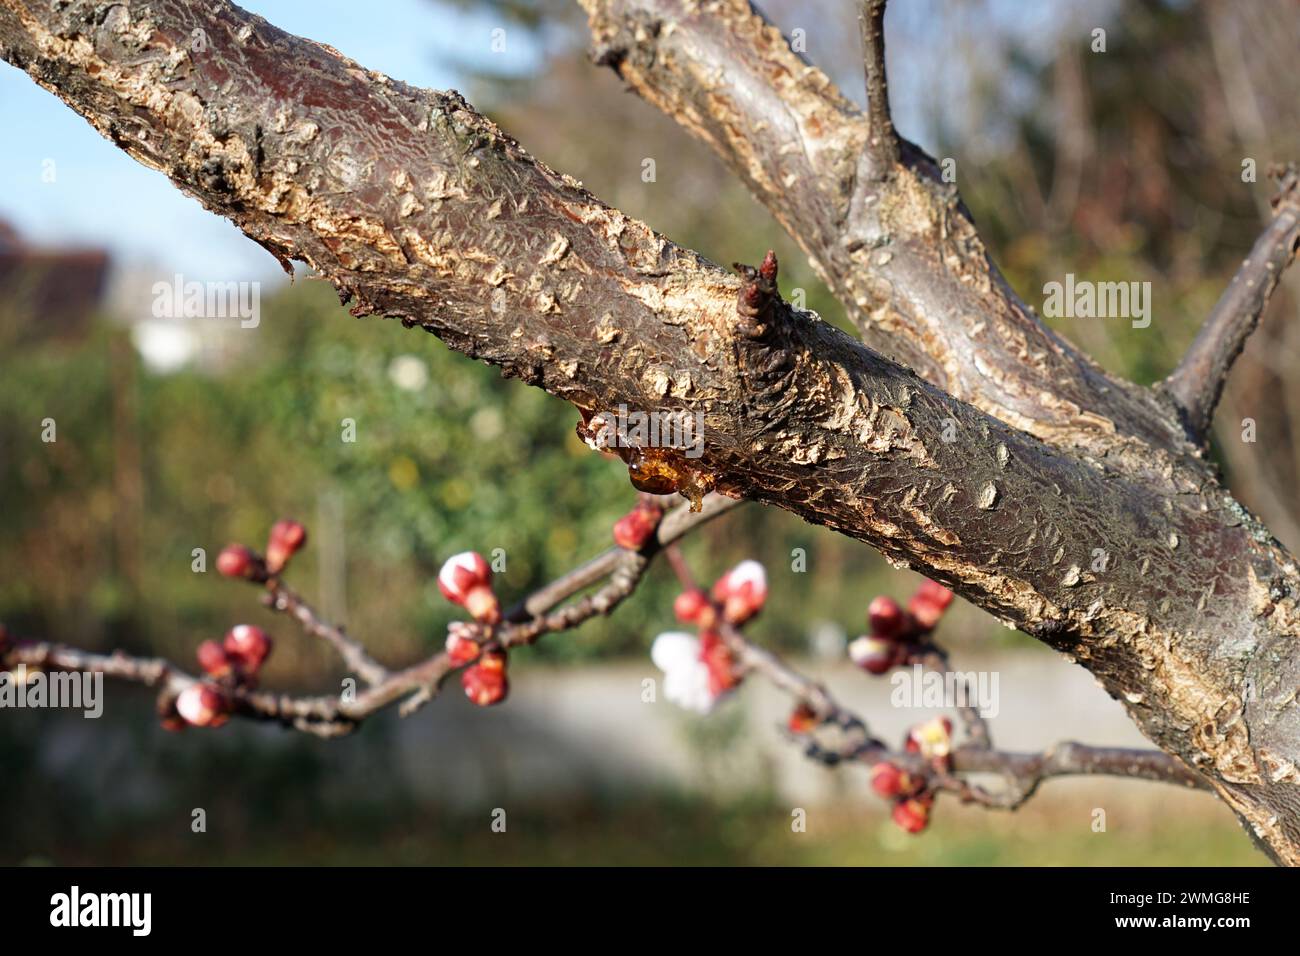 Bark of an apricot tree with gum flow due to monilia Stock Photo